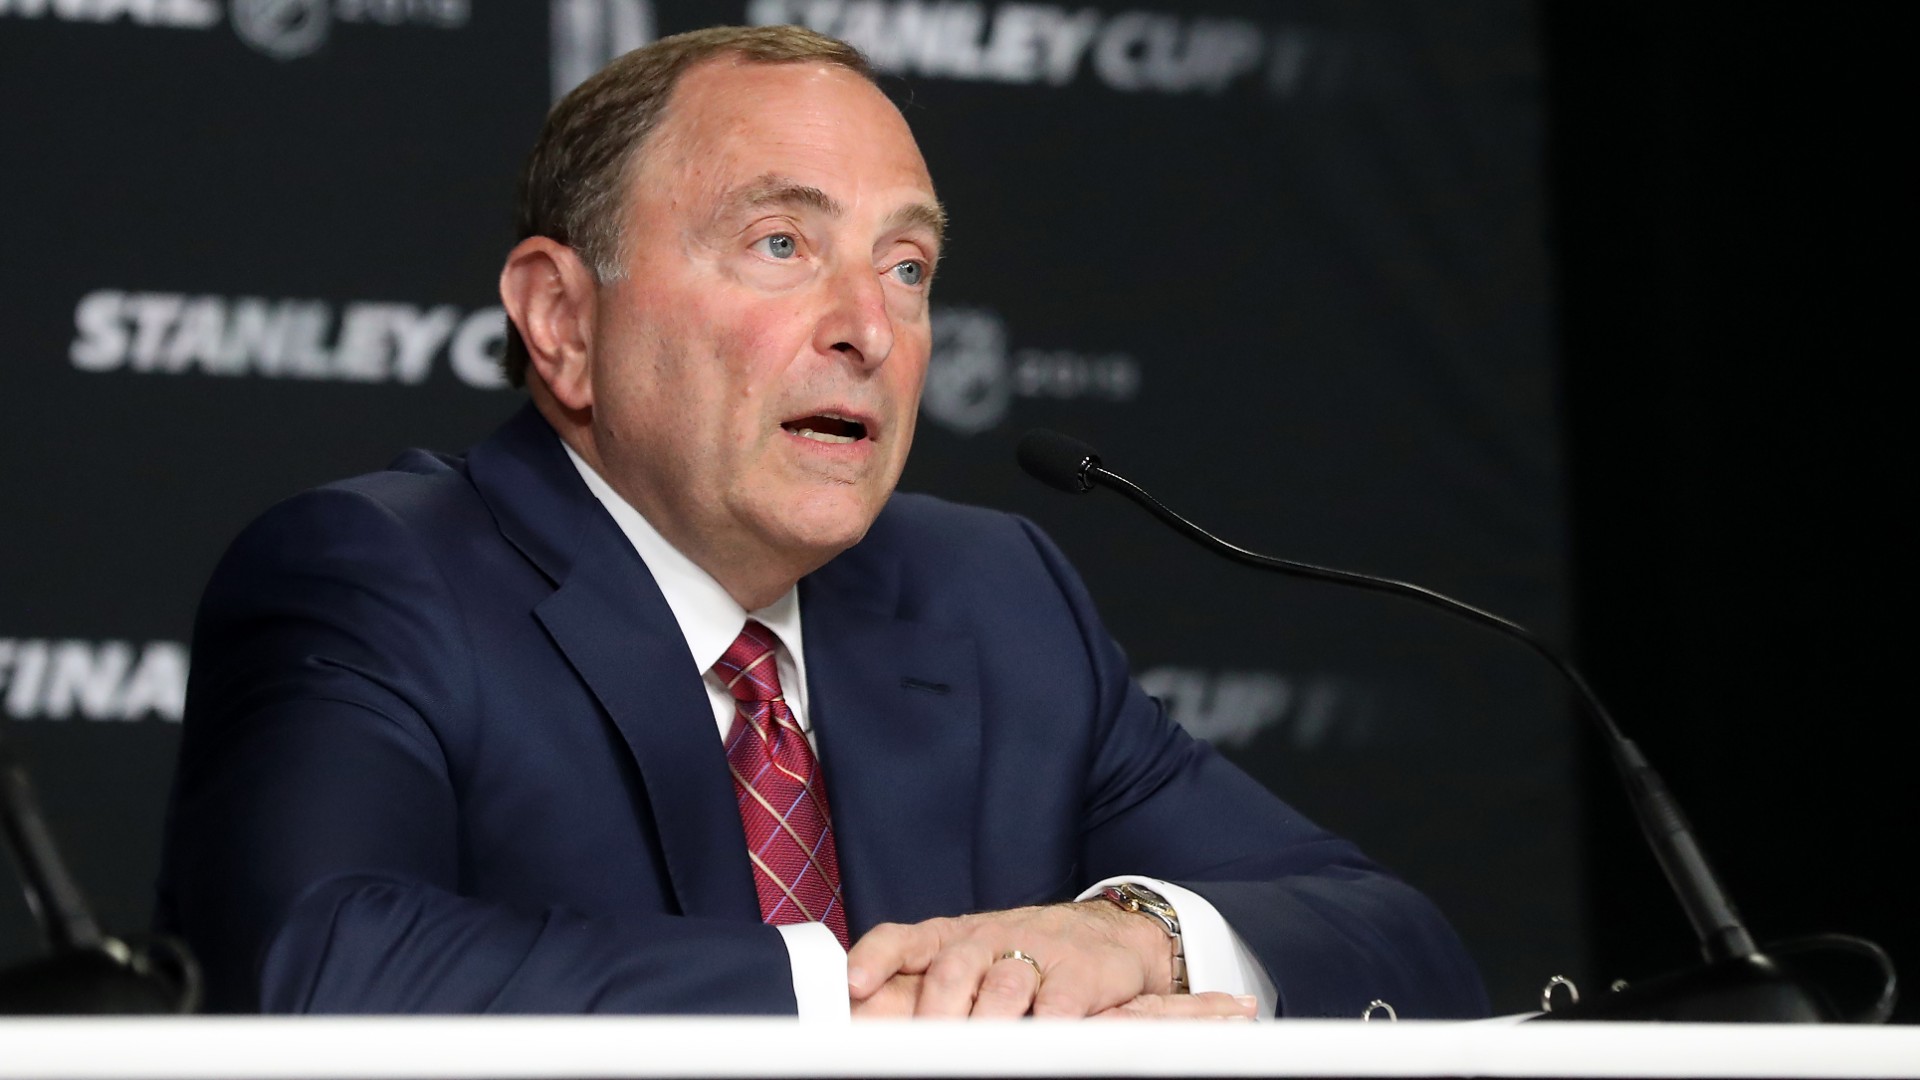 NHL commissioner Gary Bettman says 201920 season is 'probably going to